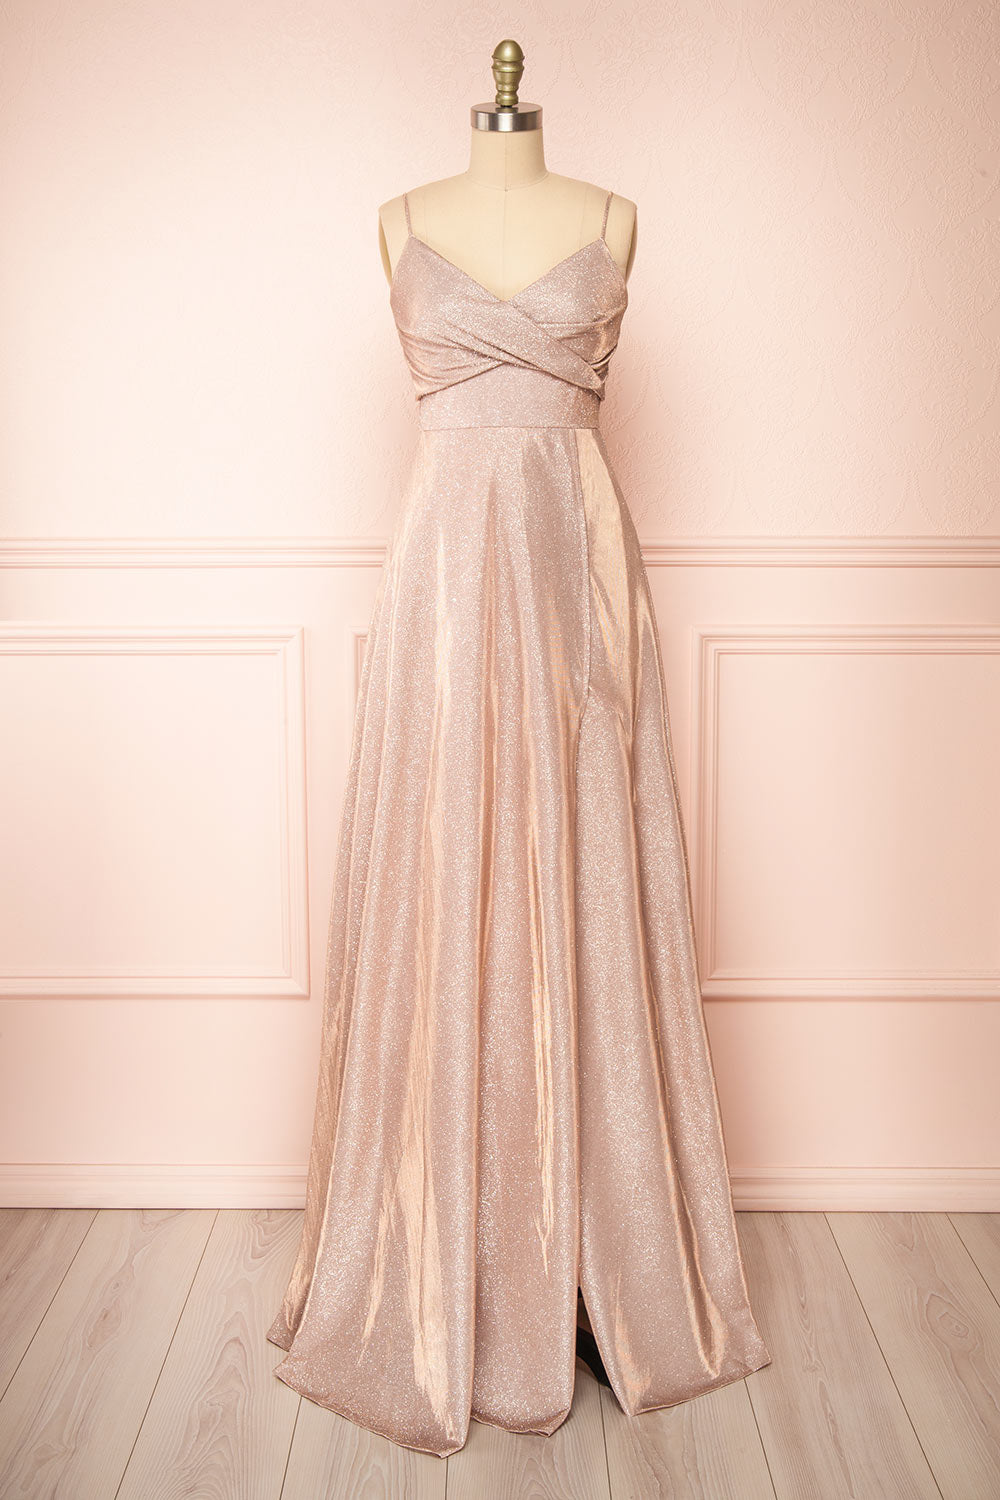 Velouette Shimmery Rose Gold Maxi Dress - Boutique 1861  front view